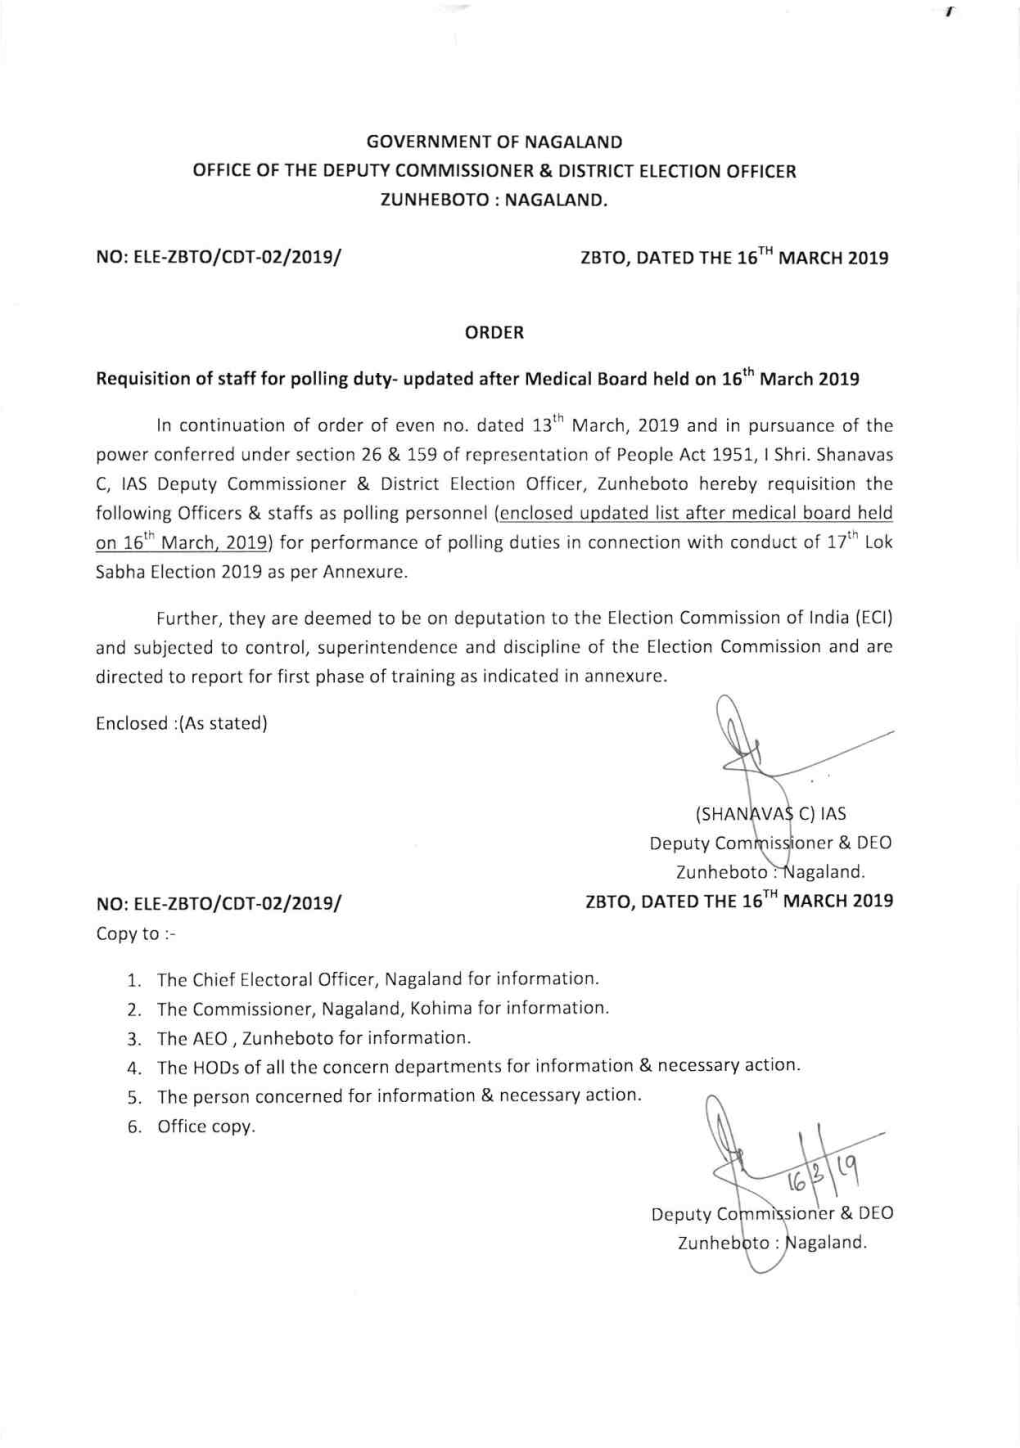 Ln Continuation of Order of Even No. Dated 13Th March, 2019 and In